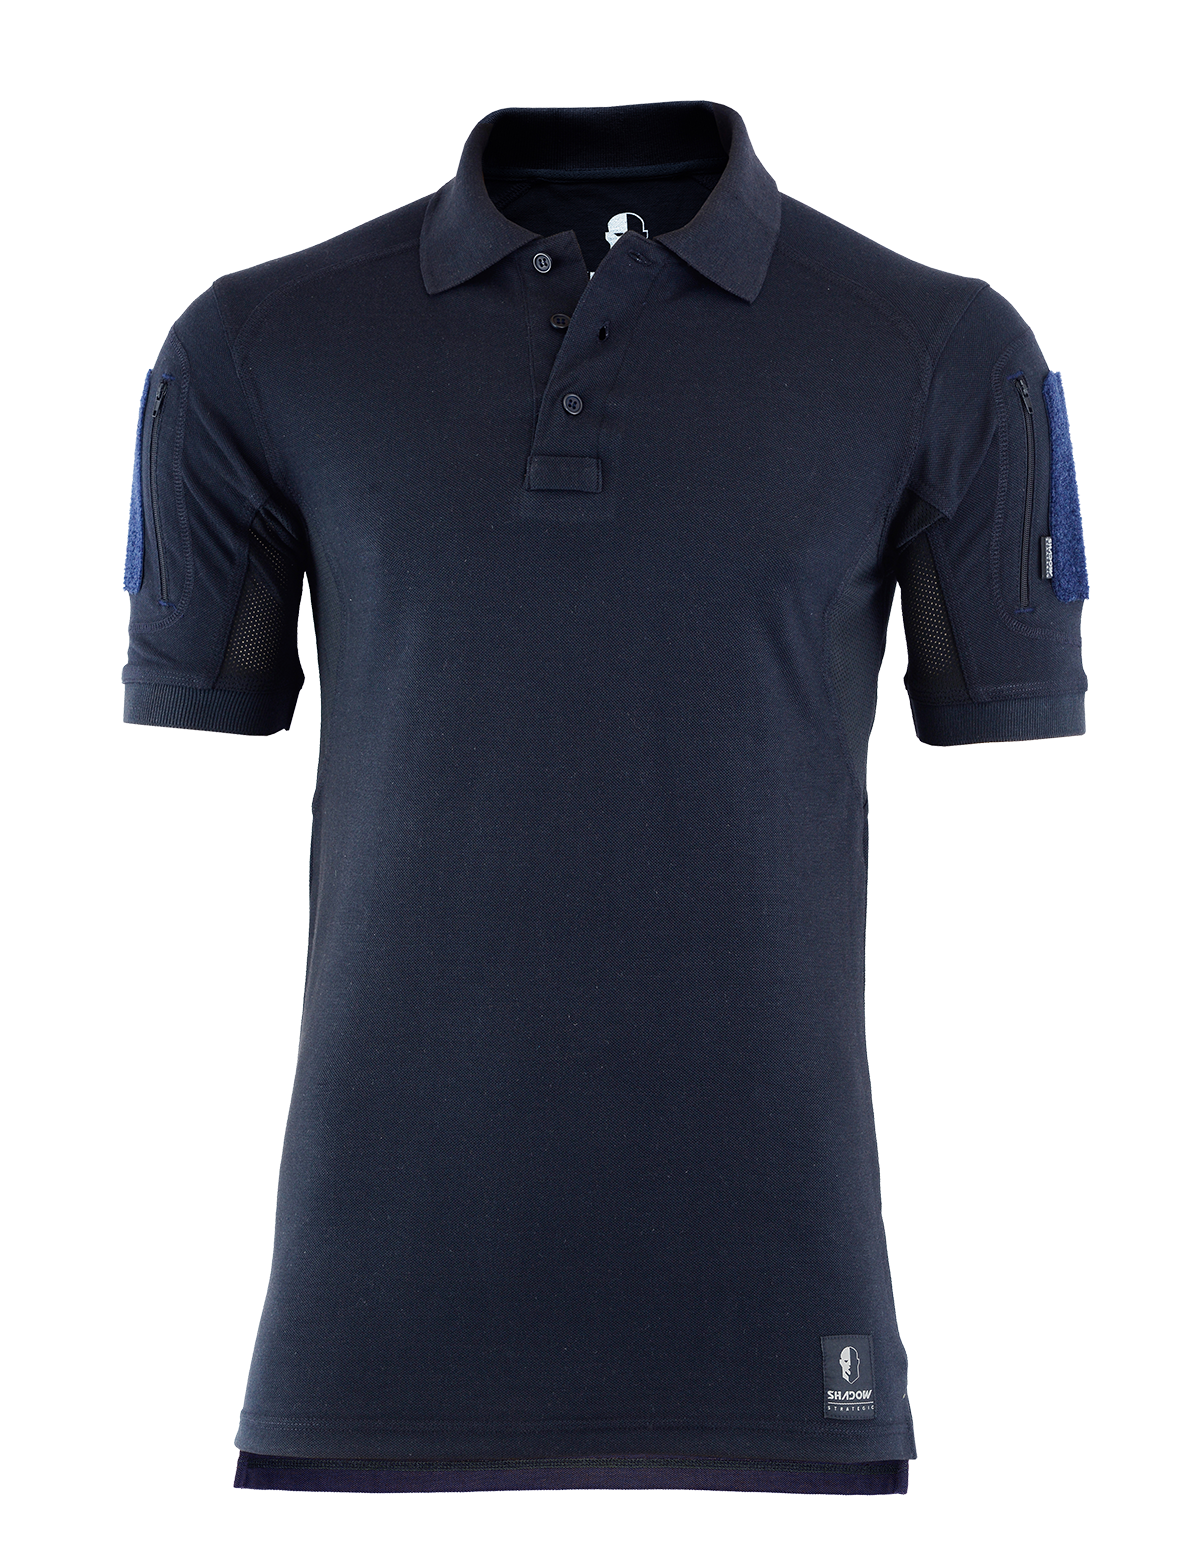 Tactical Zone Operator Polo shirt Navy Blue front